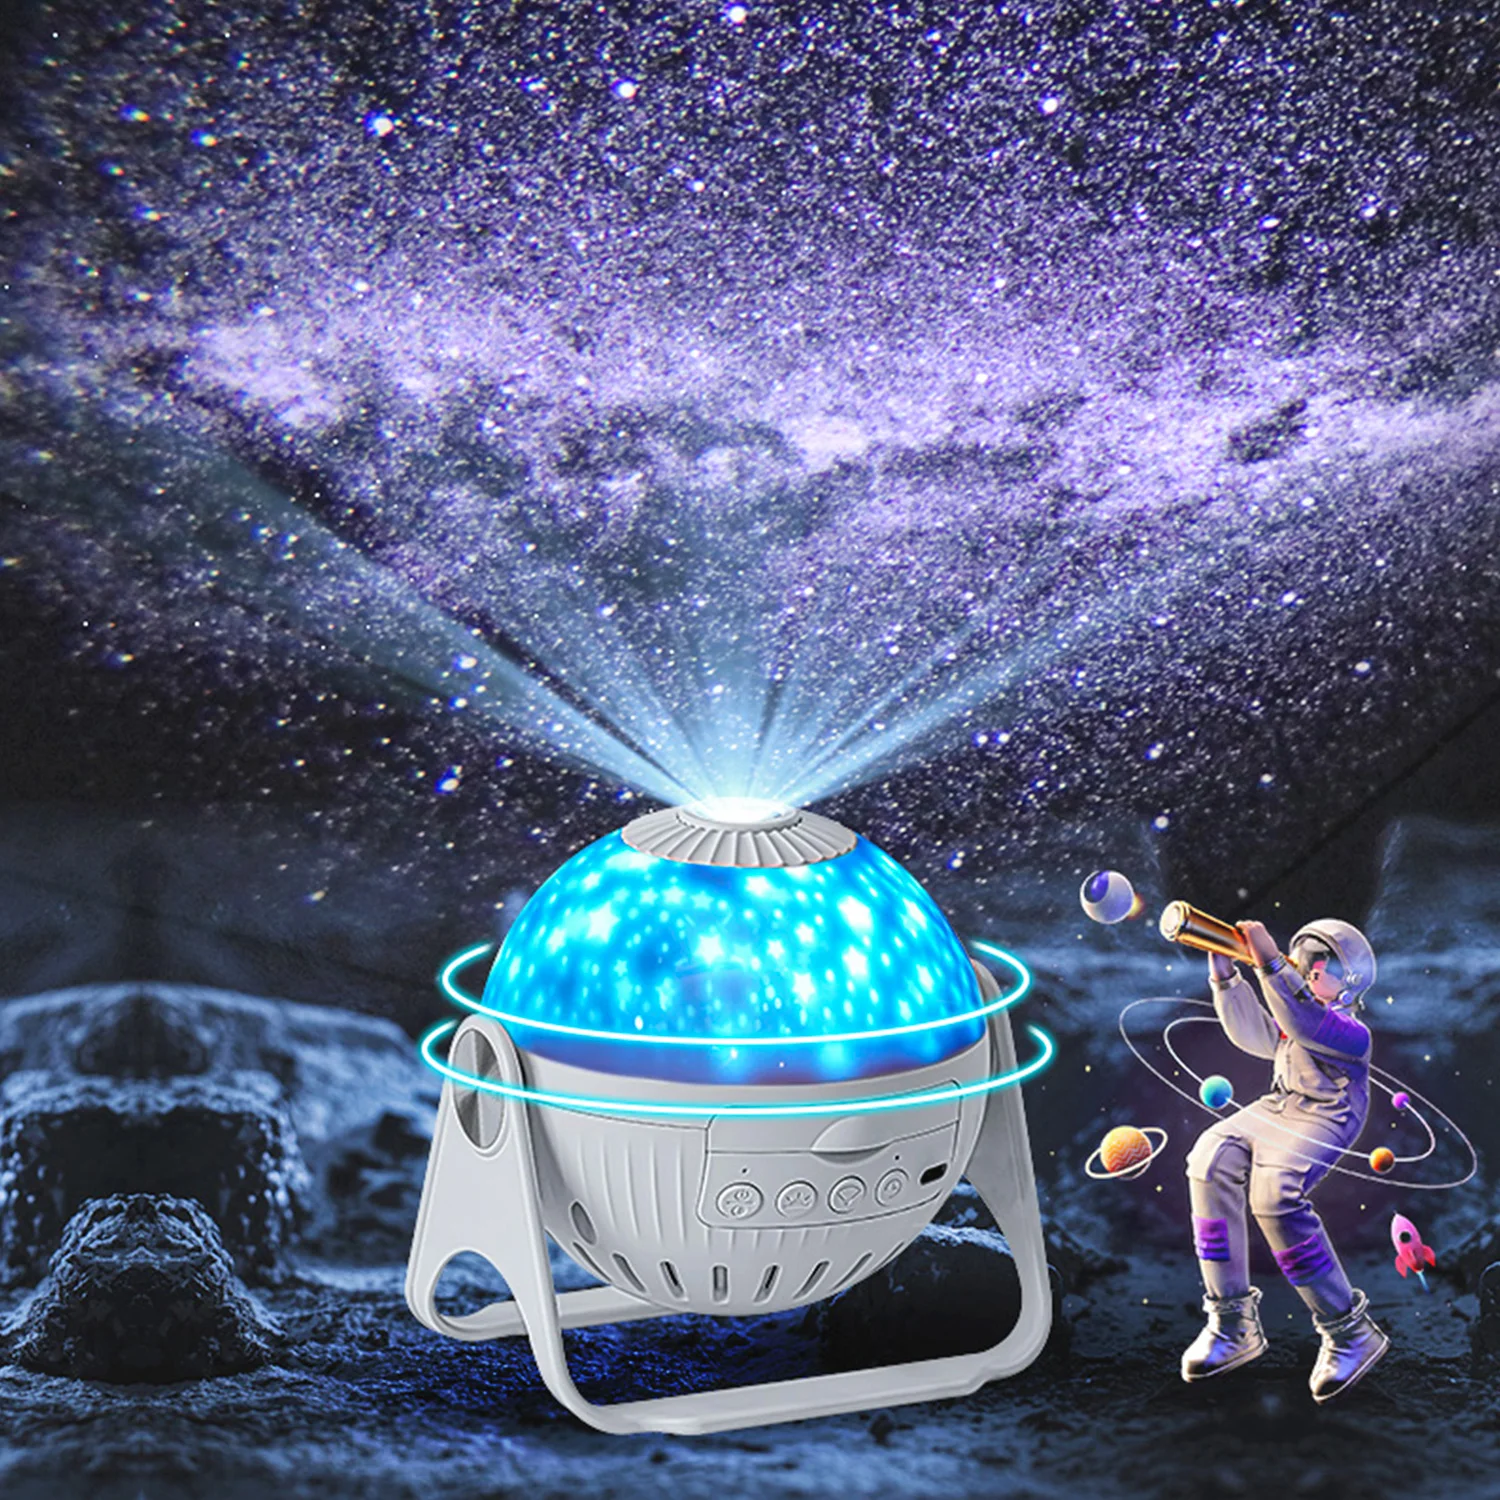 laden attent houding Star Projector 3 In 1 Galaxy Night Light Projector Wireless Music Speaker  Galaxy/moon/starry For Kids Baby Teen Adults - Buy Led Projector  Light,Galaxy Projector Light,Star Projector Lights Product on Alibaba.com